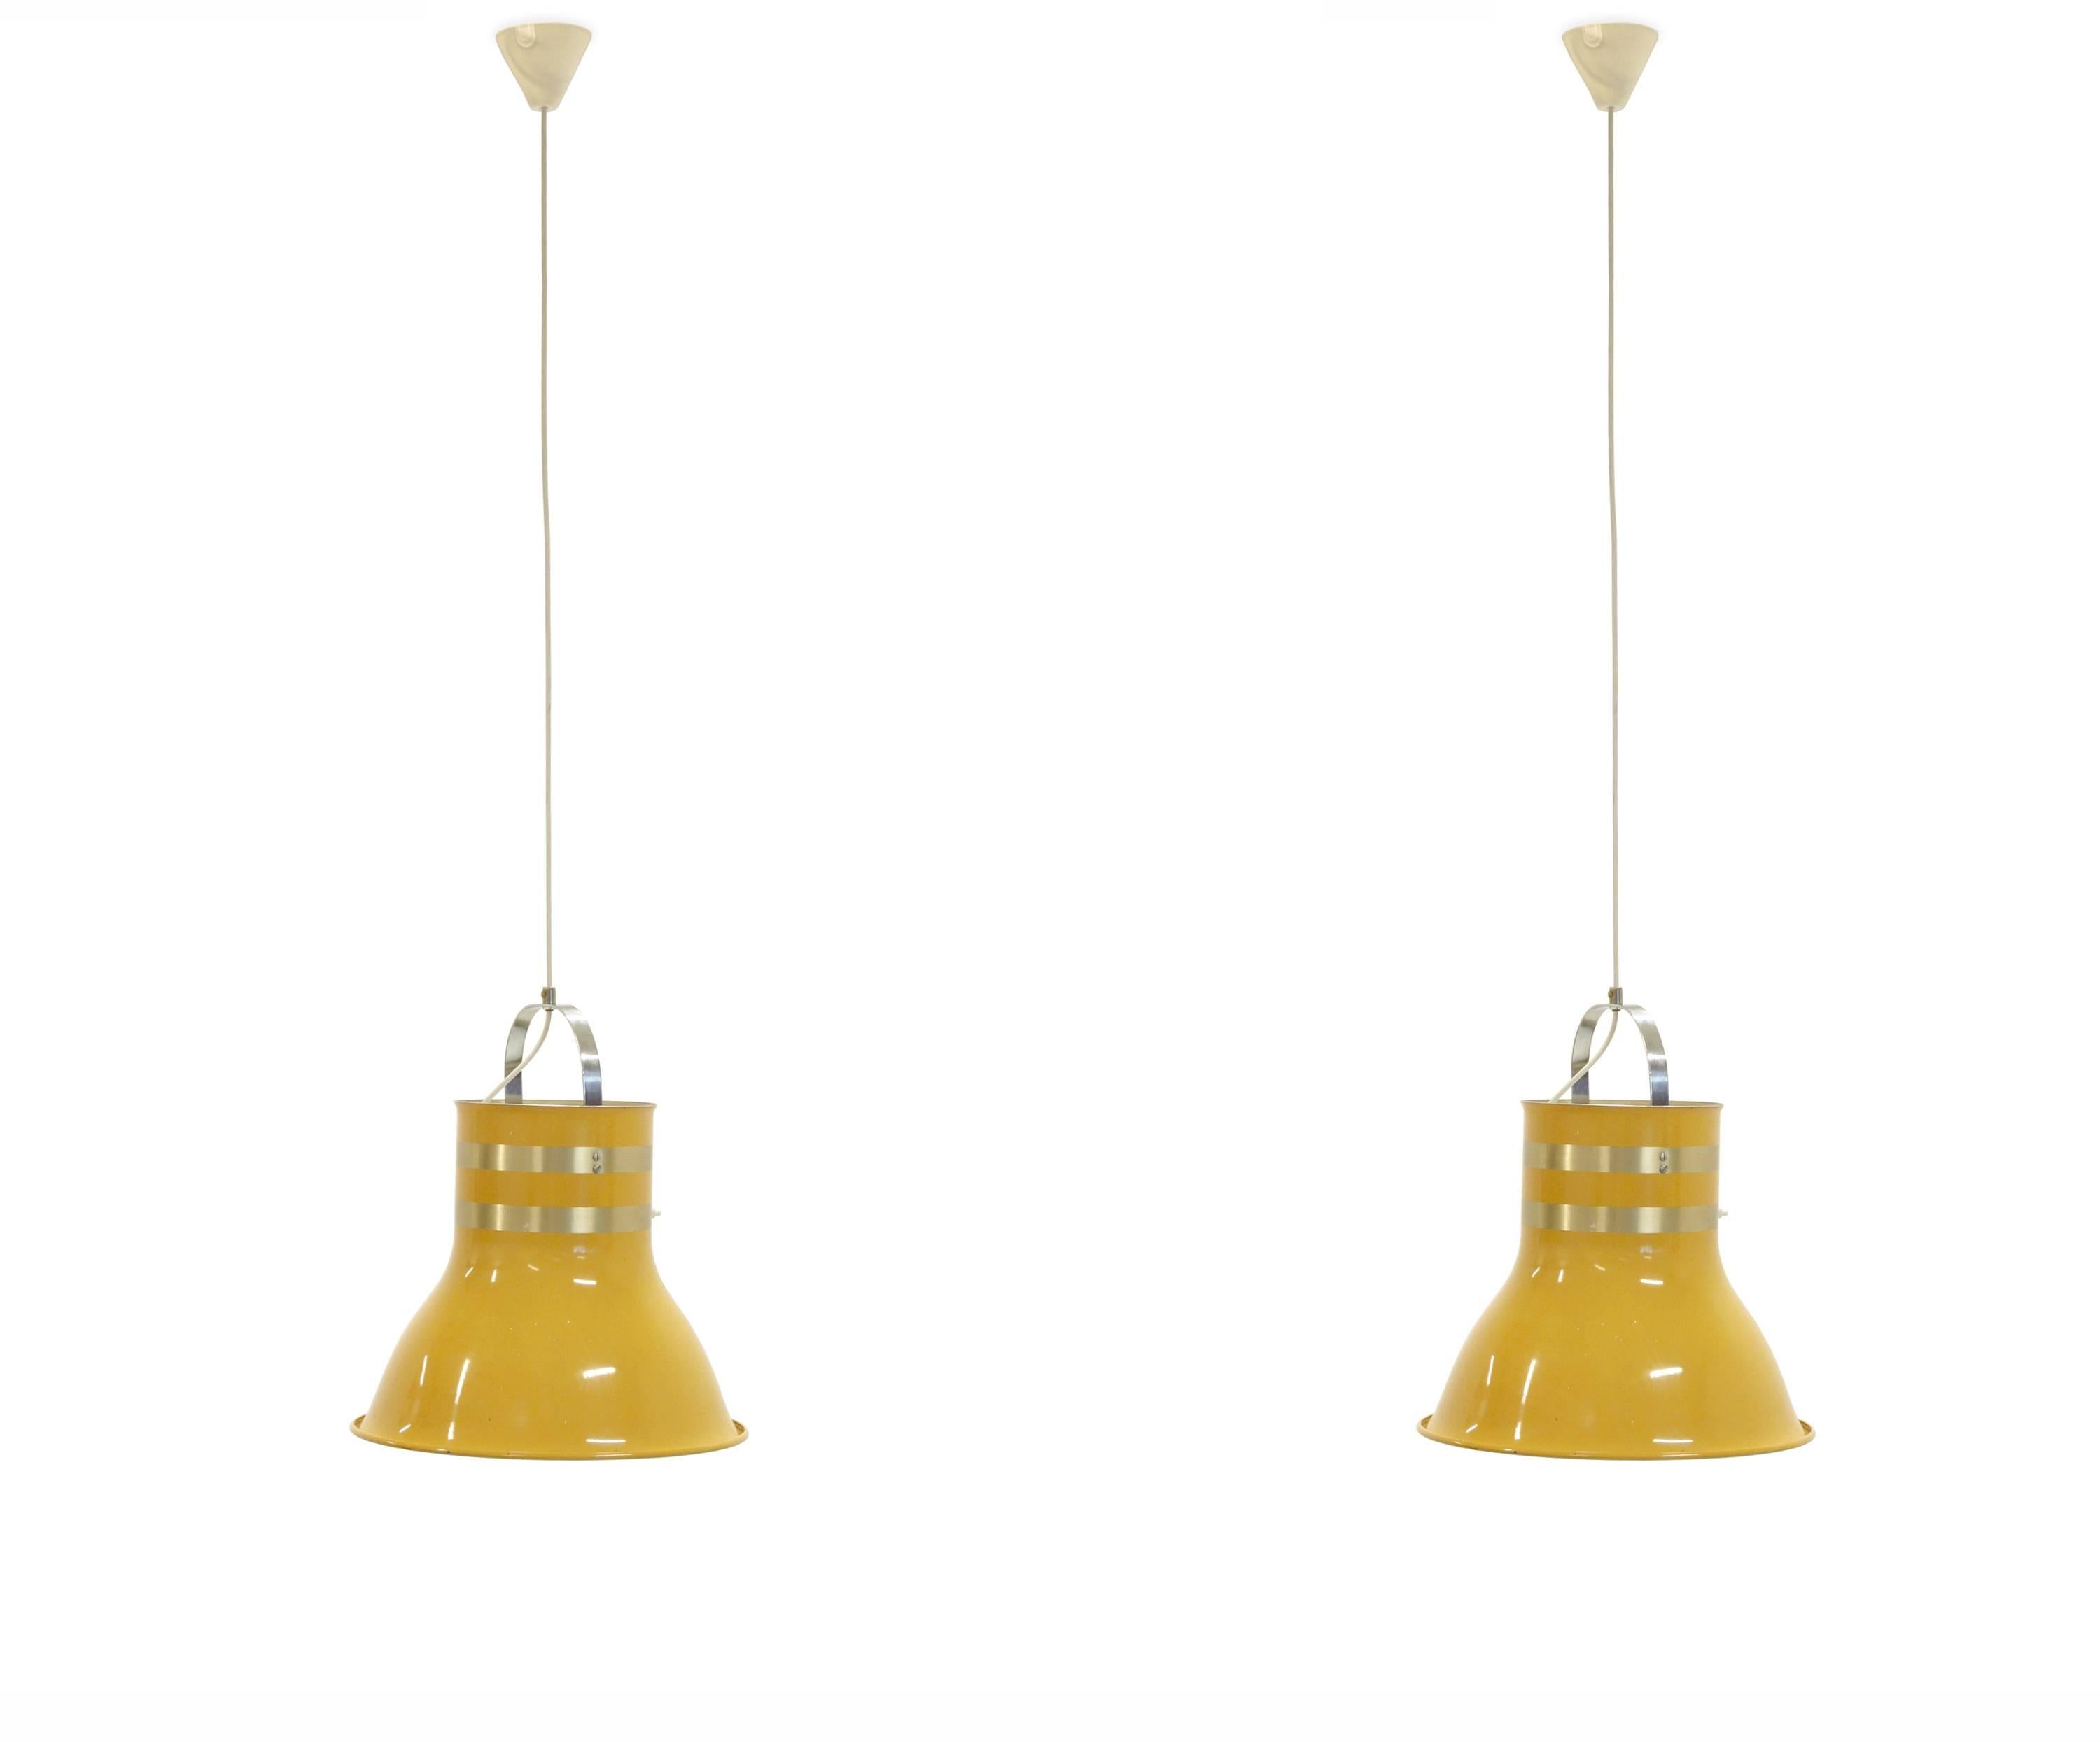 Mid-Century Modern Pair of Large Swedish Ceiling Lights by Per Sundstedt for Kosta, 1970s